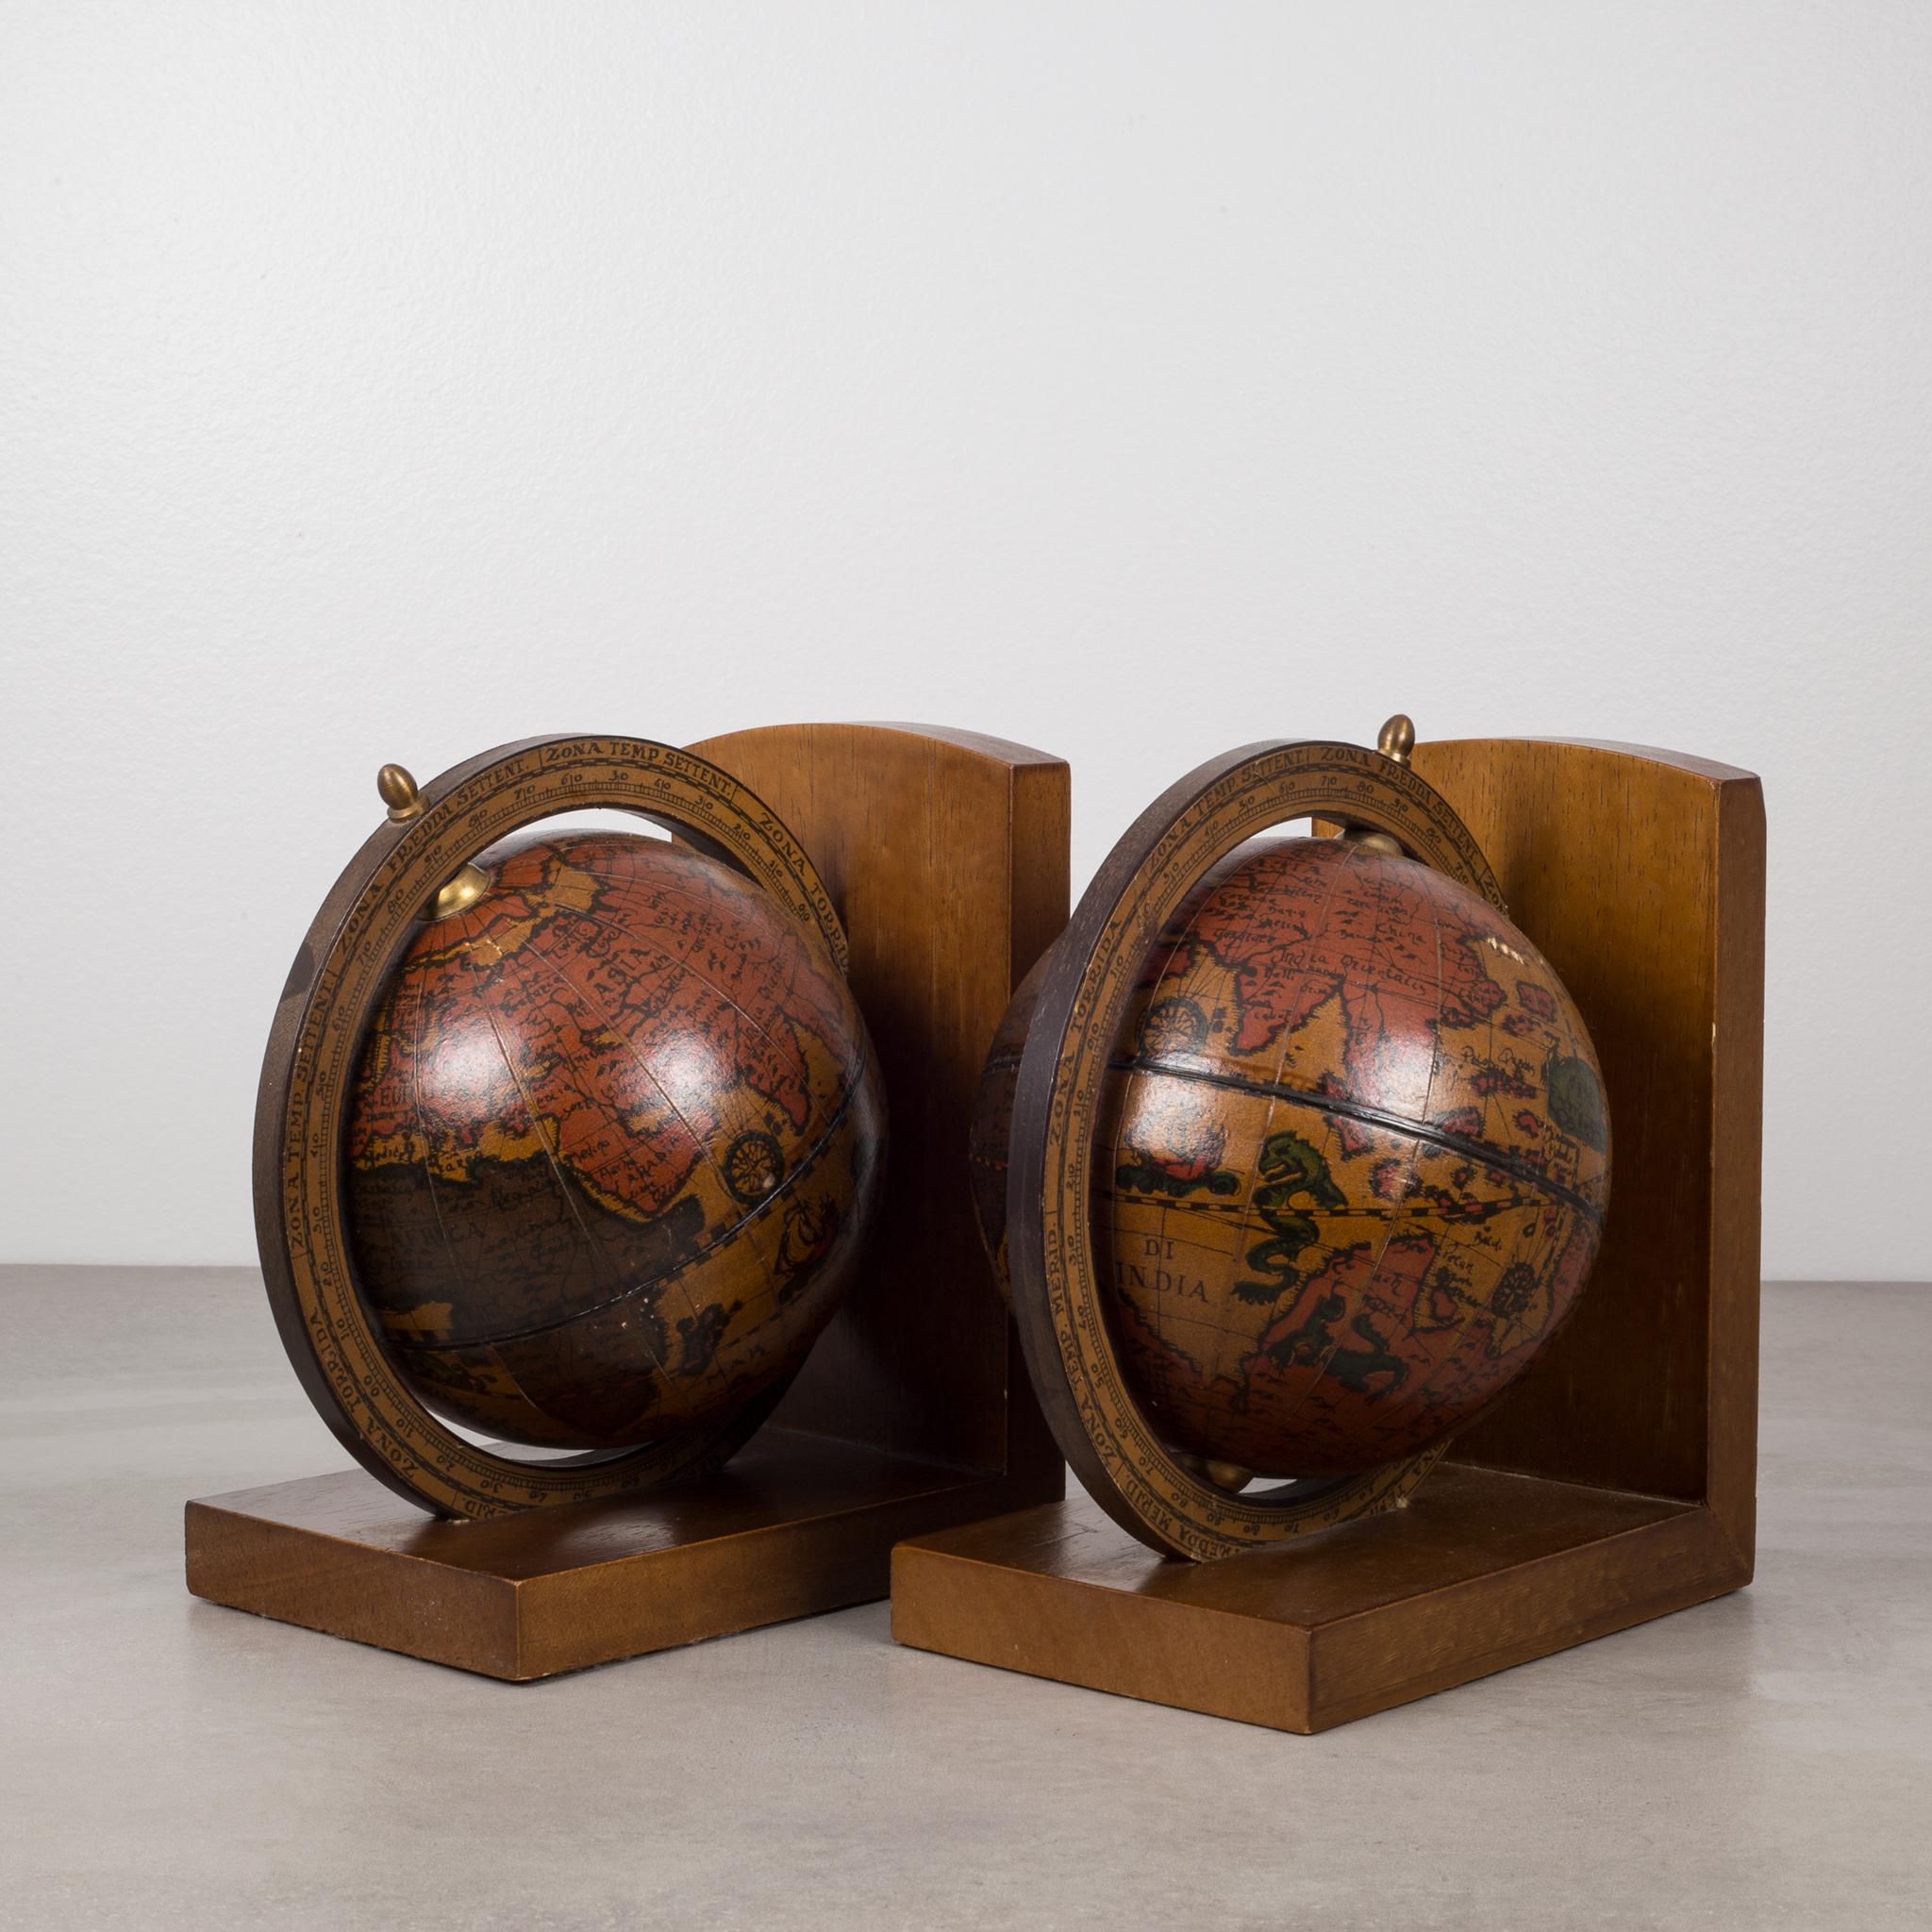 Pair of globe bookends that rotate on their brass axis. Globes sit on a wooden base. 
Made in Italy.